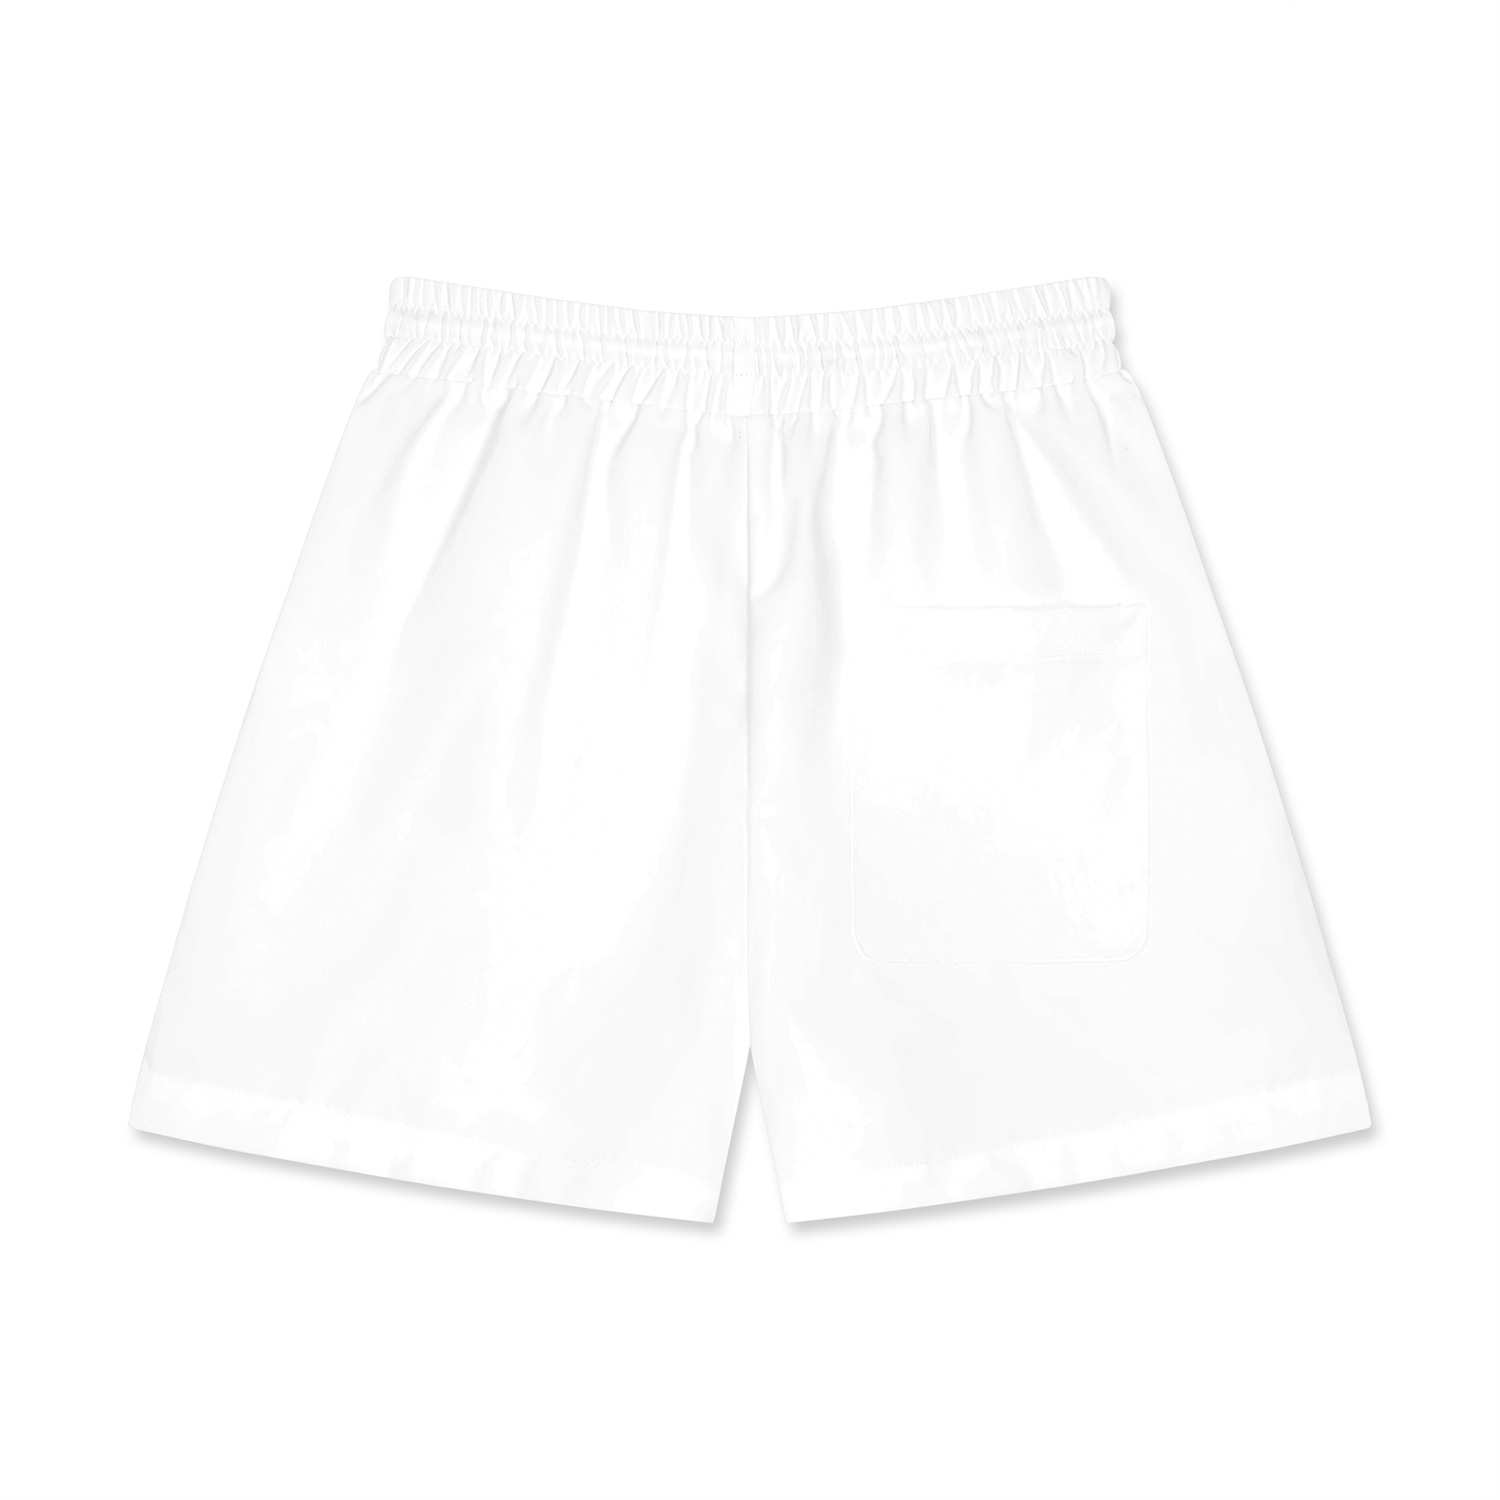 All-Over Print Women's Athletic Shorts | HugePOD-3